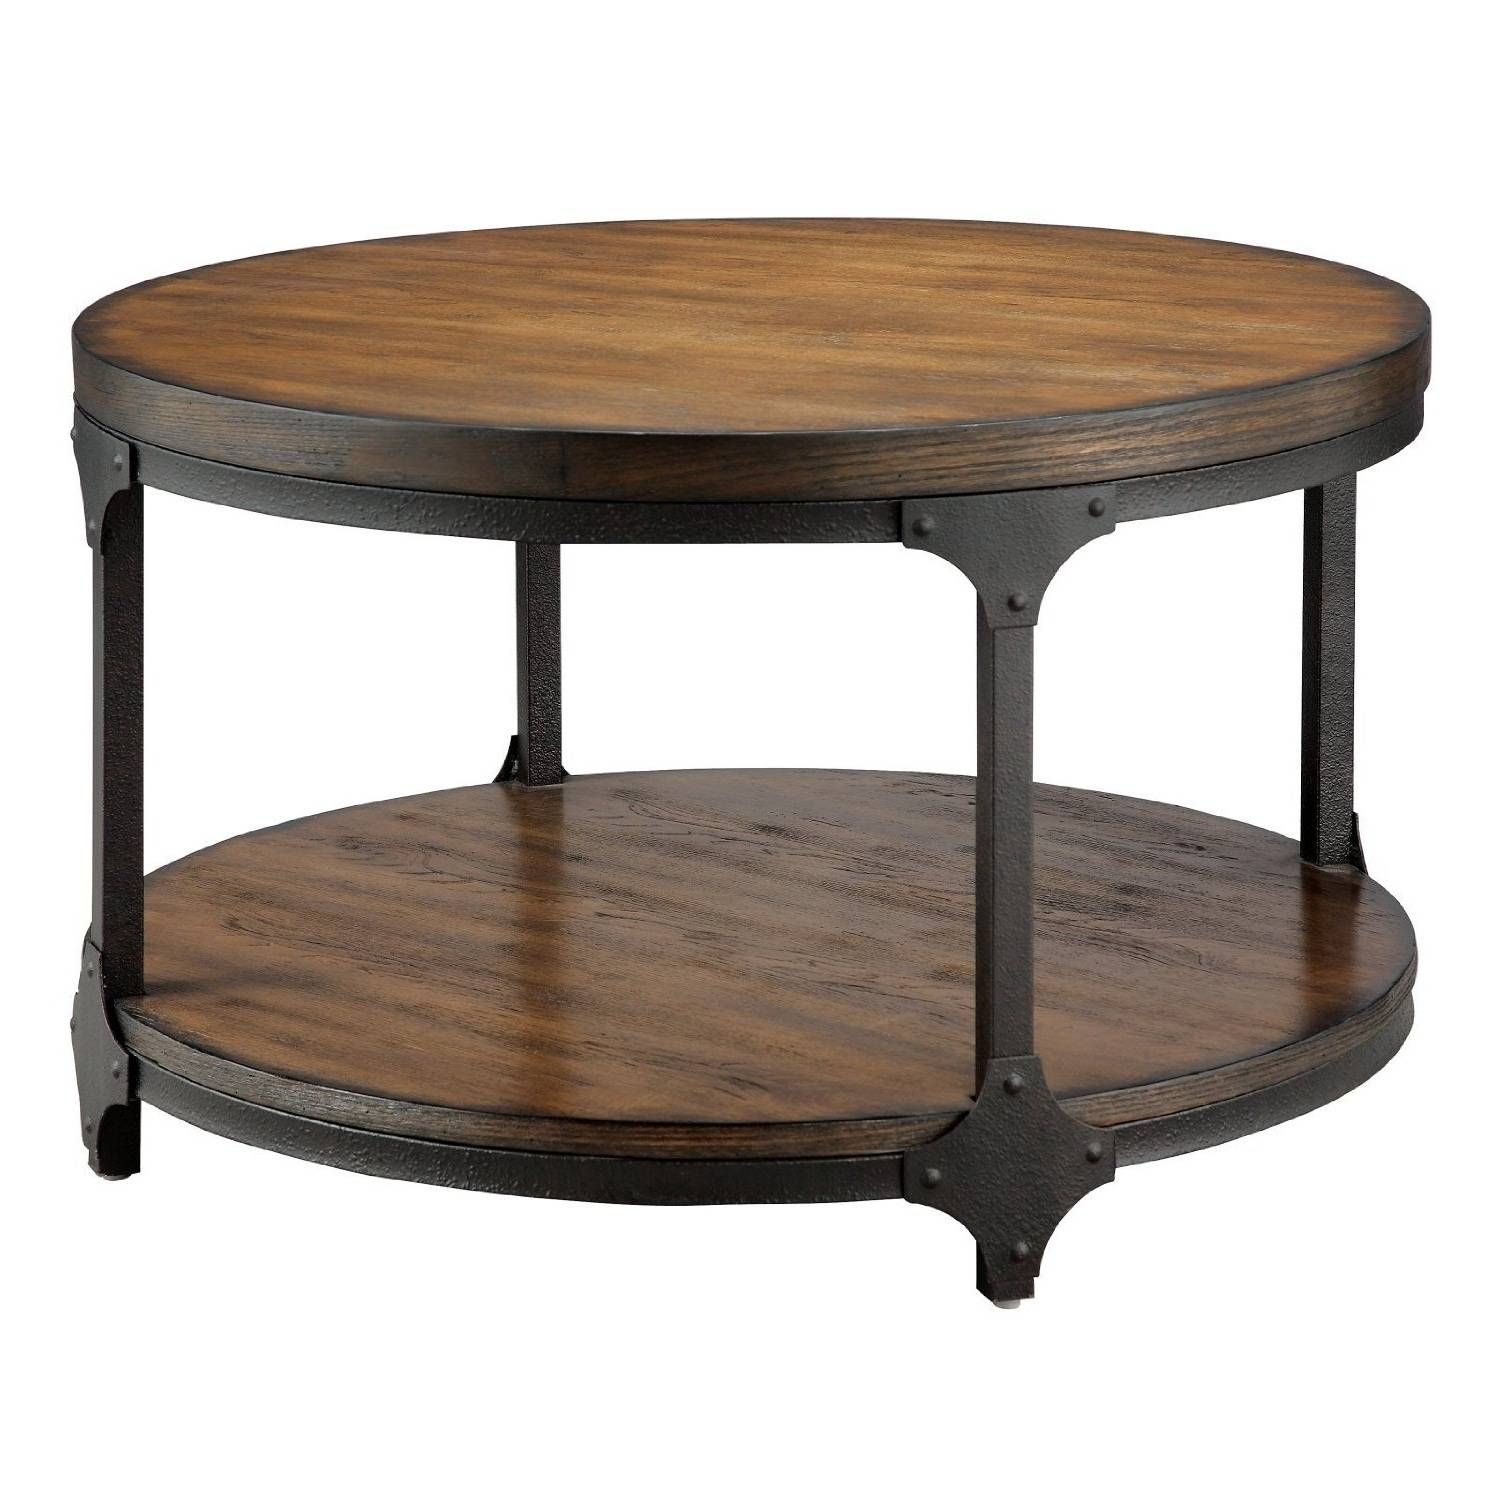 Coffee Table: Amazing Metal Round Coffee Table Design Ideas Rustic Throughout Small Wood Coffee Tables (View 14 of 30)